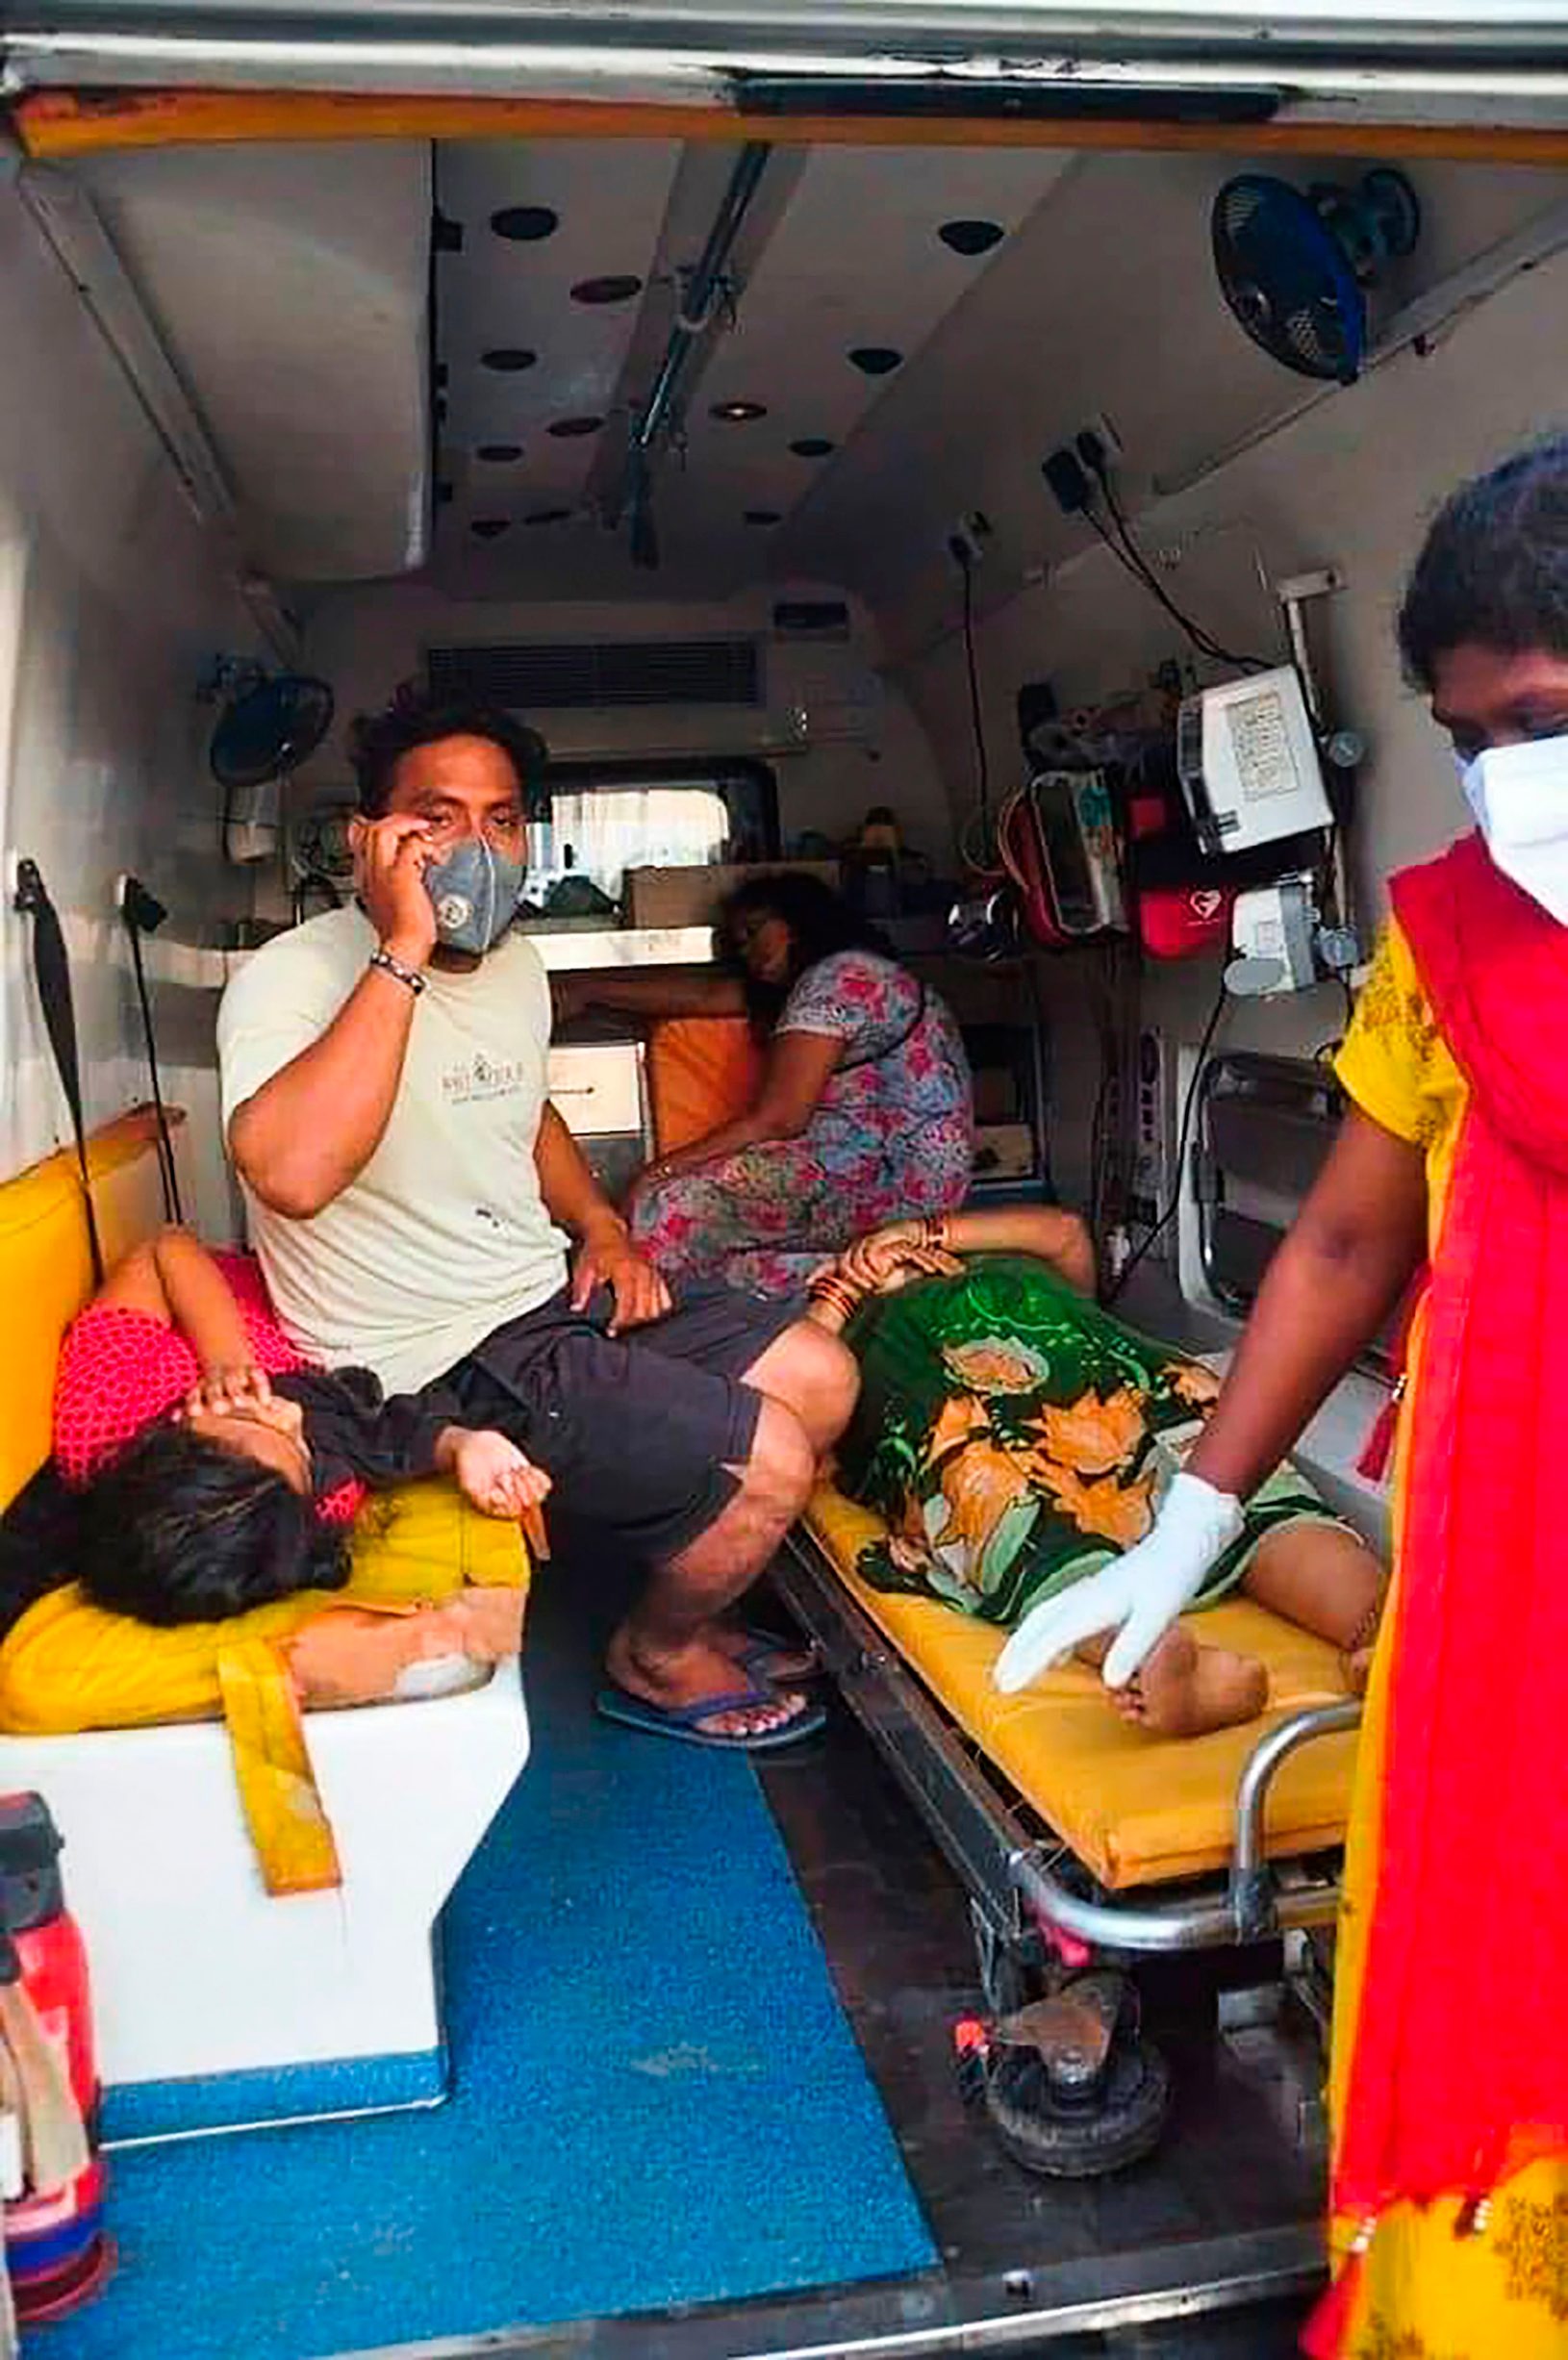 Women are evacuated to a hospital  in an ambulance following a gas leak incident from an LG Polymers plant in Visakhapatnam on May 7, 2020. - At least five people have been killed and several hundred hospitalised after a gas leak at a chemicals plant on the east coast of India, police said on May 7. They said that the gas had leaked out of two 5,000-tonne tanks that had been unattended due to India's coronavirus lockdown in place since late March. (Photo by - / AFP)